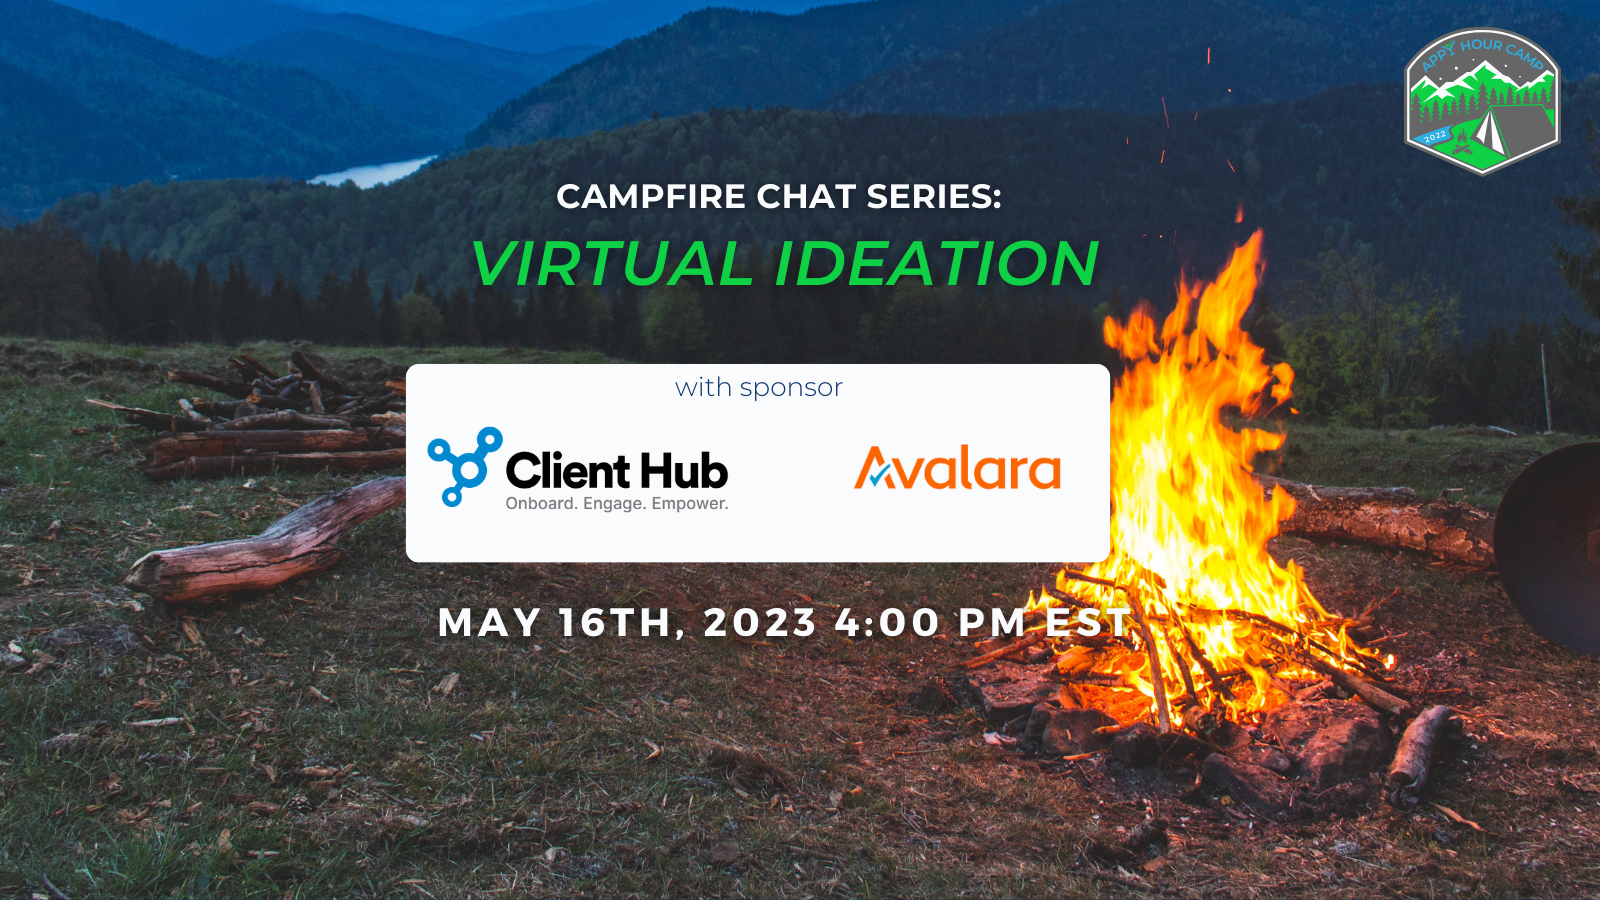 CampFire Chat Series: ClientHub, Avalara- Virtual Ideation